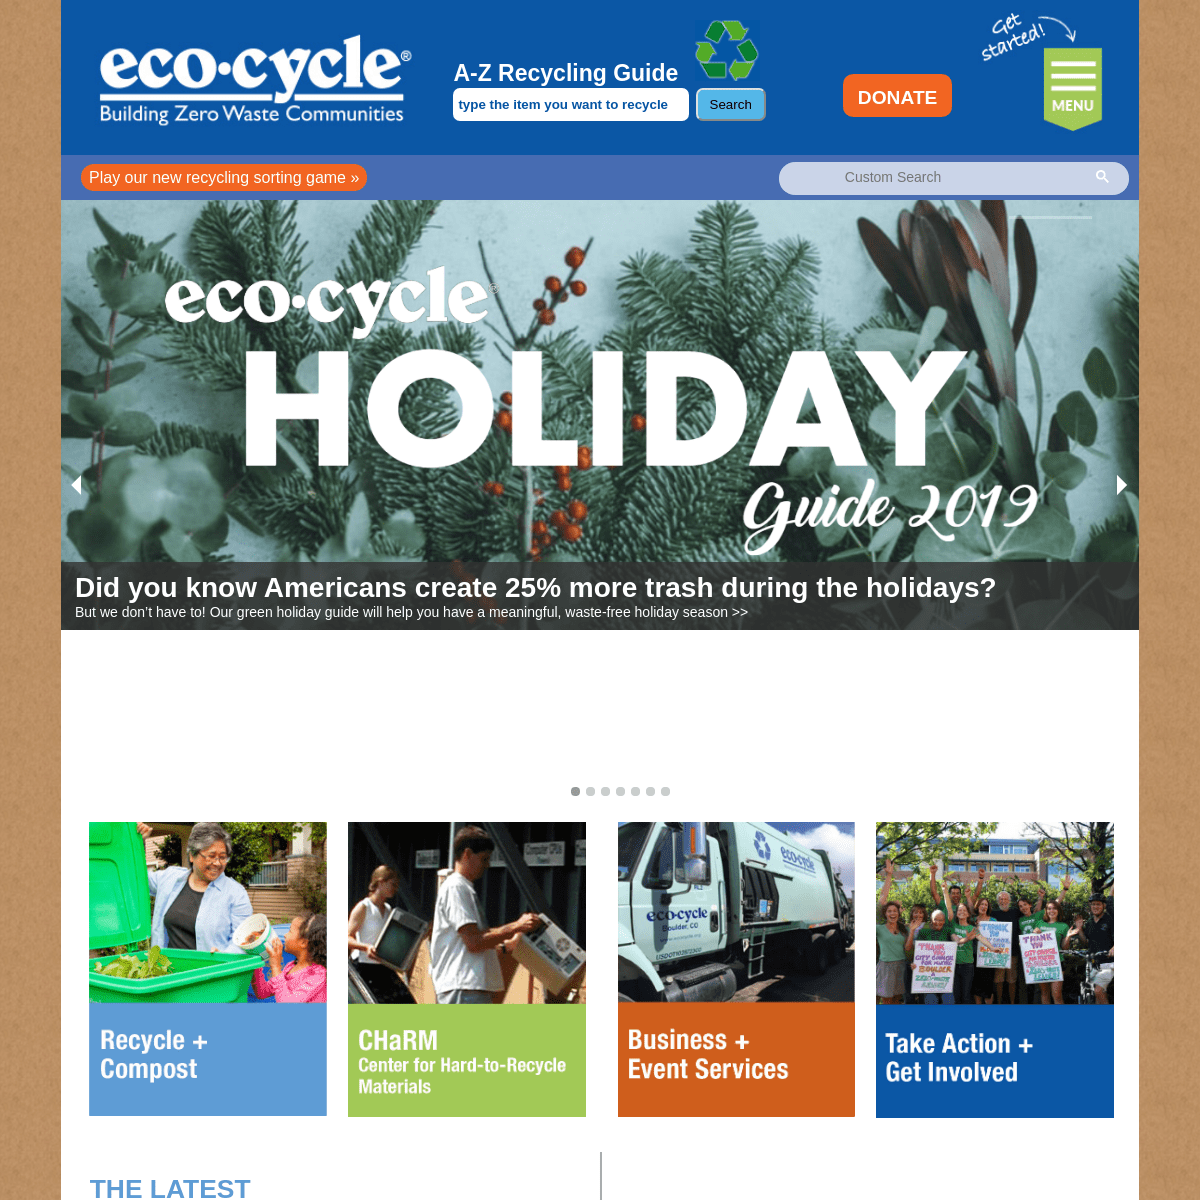 A complete backup of ecocycle.org